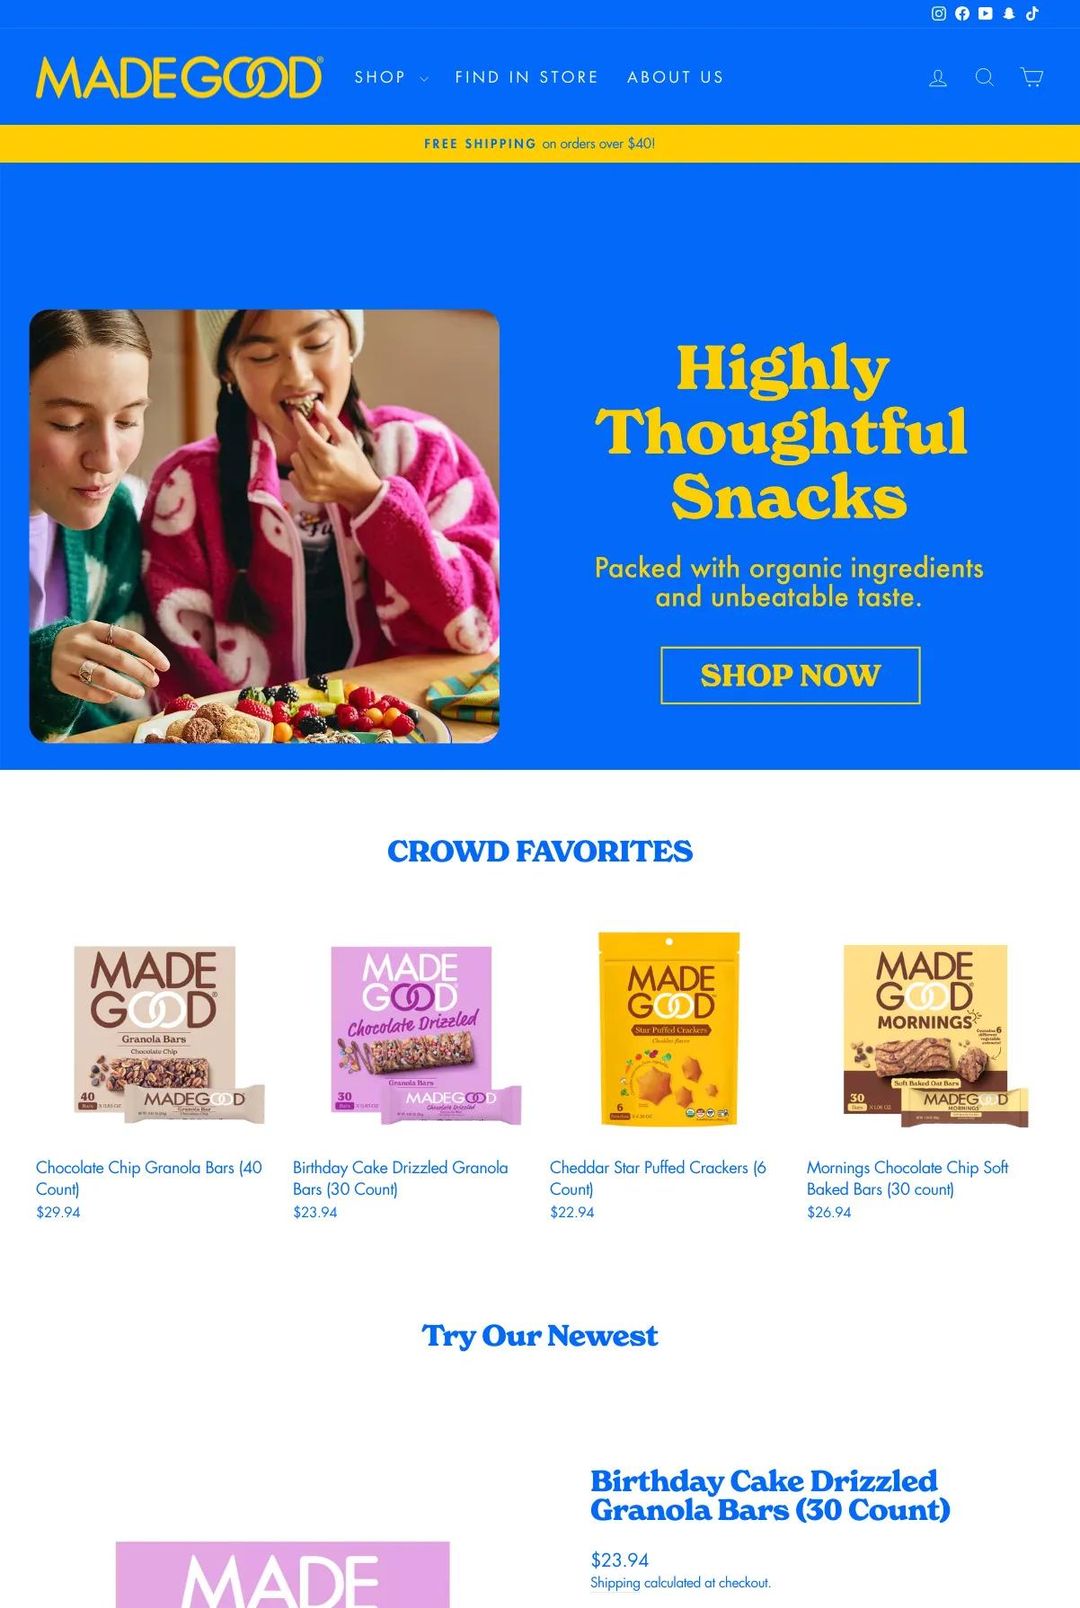 Screenshot 1 of MadeGood (Example Shopify Food and Beverage Website)